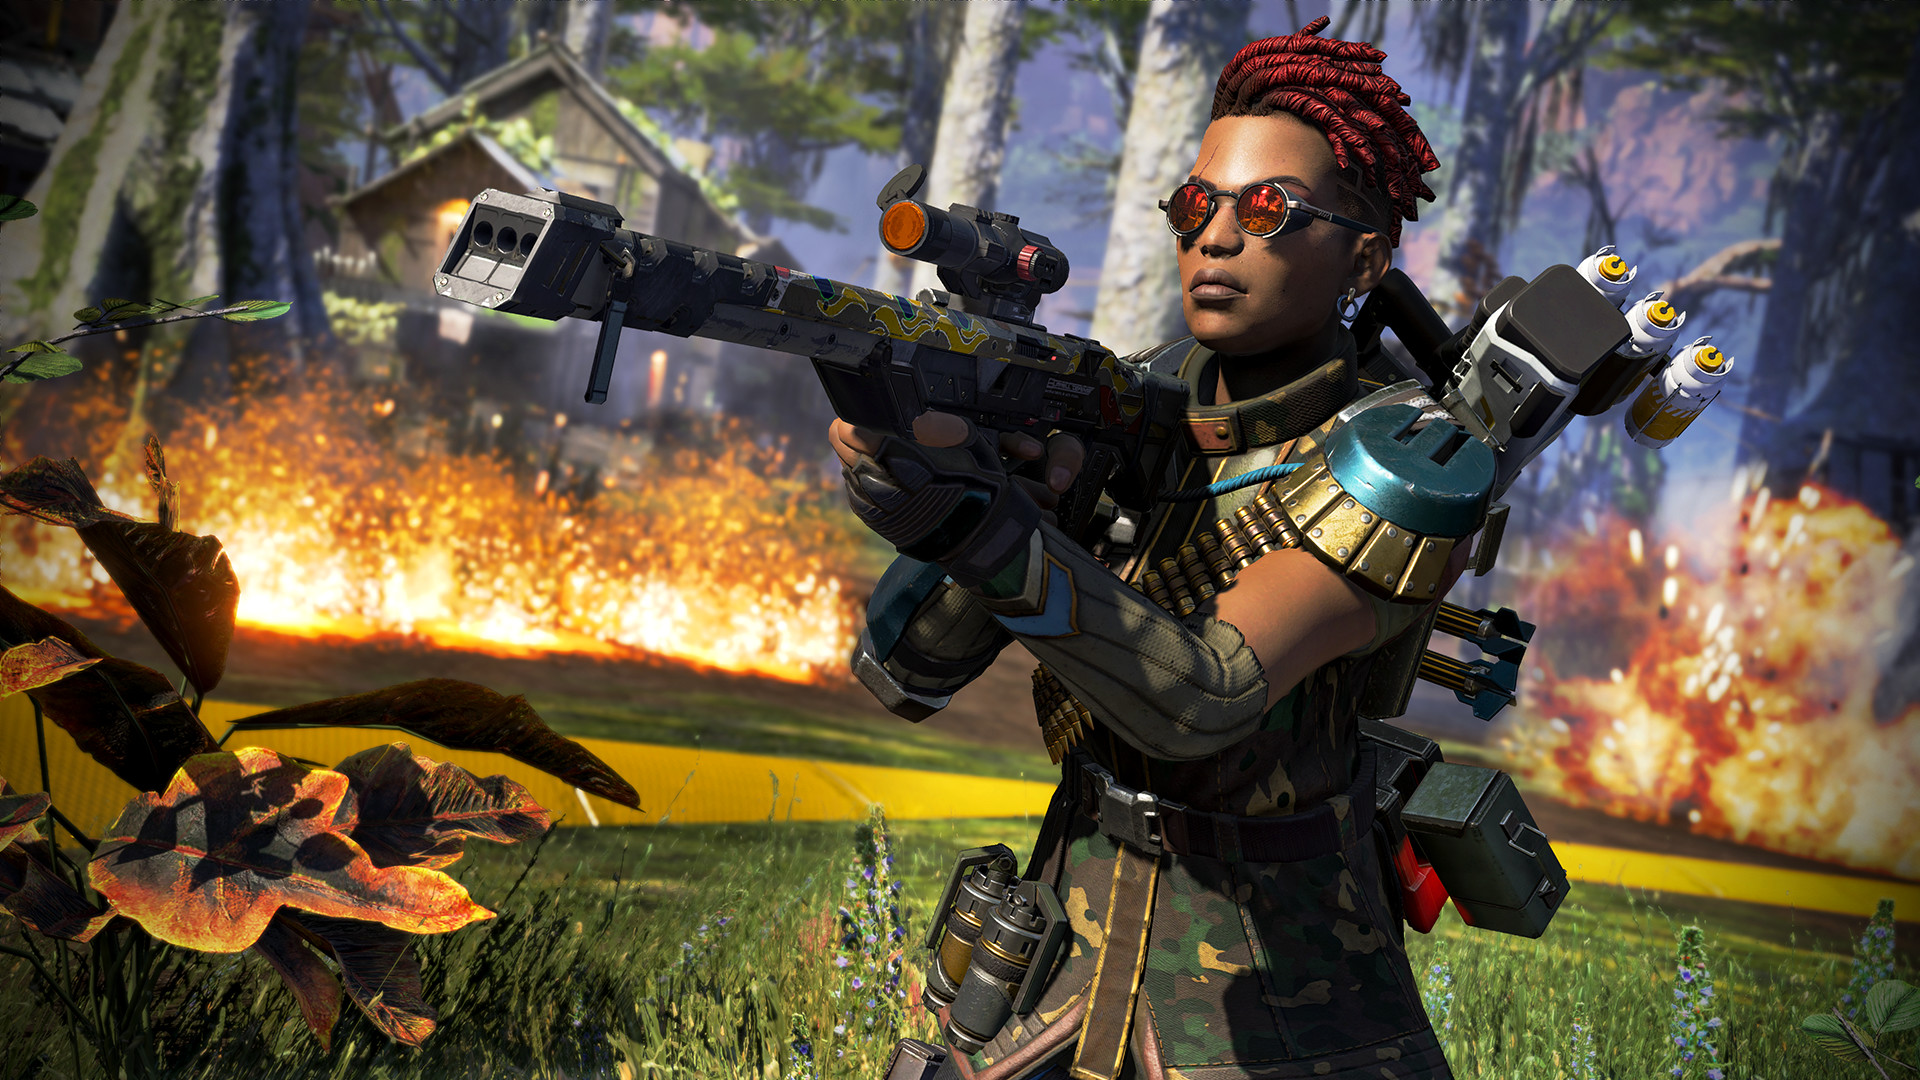 Apex Legends Might Be Getting a New Weapon, As Teased on Dev Stream – Gameranx